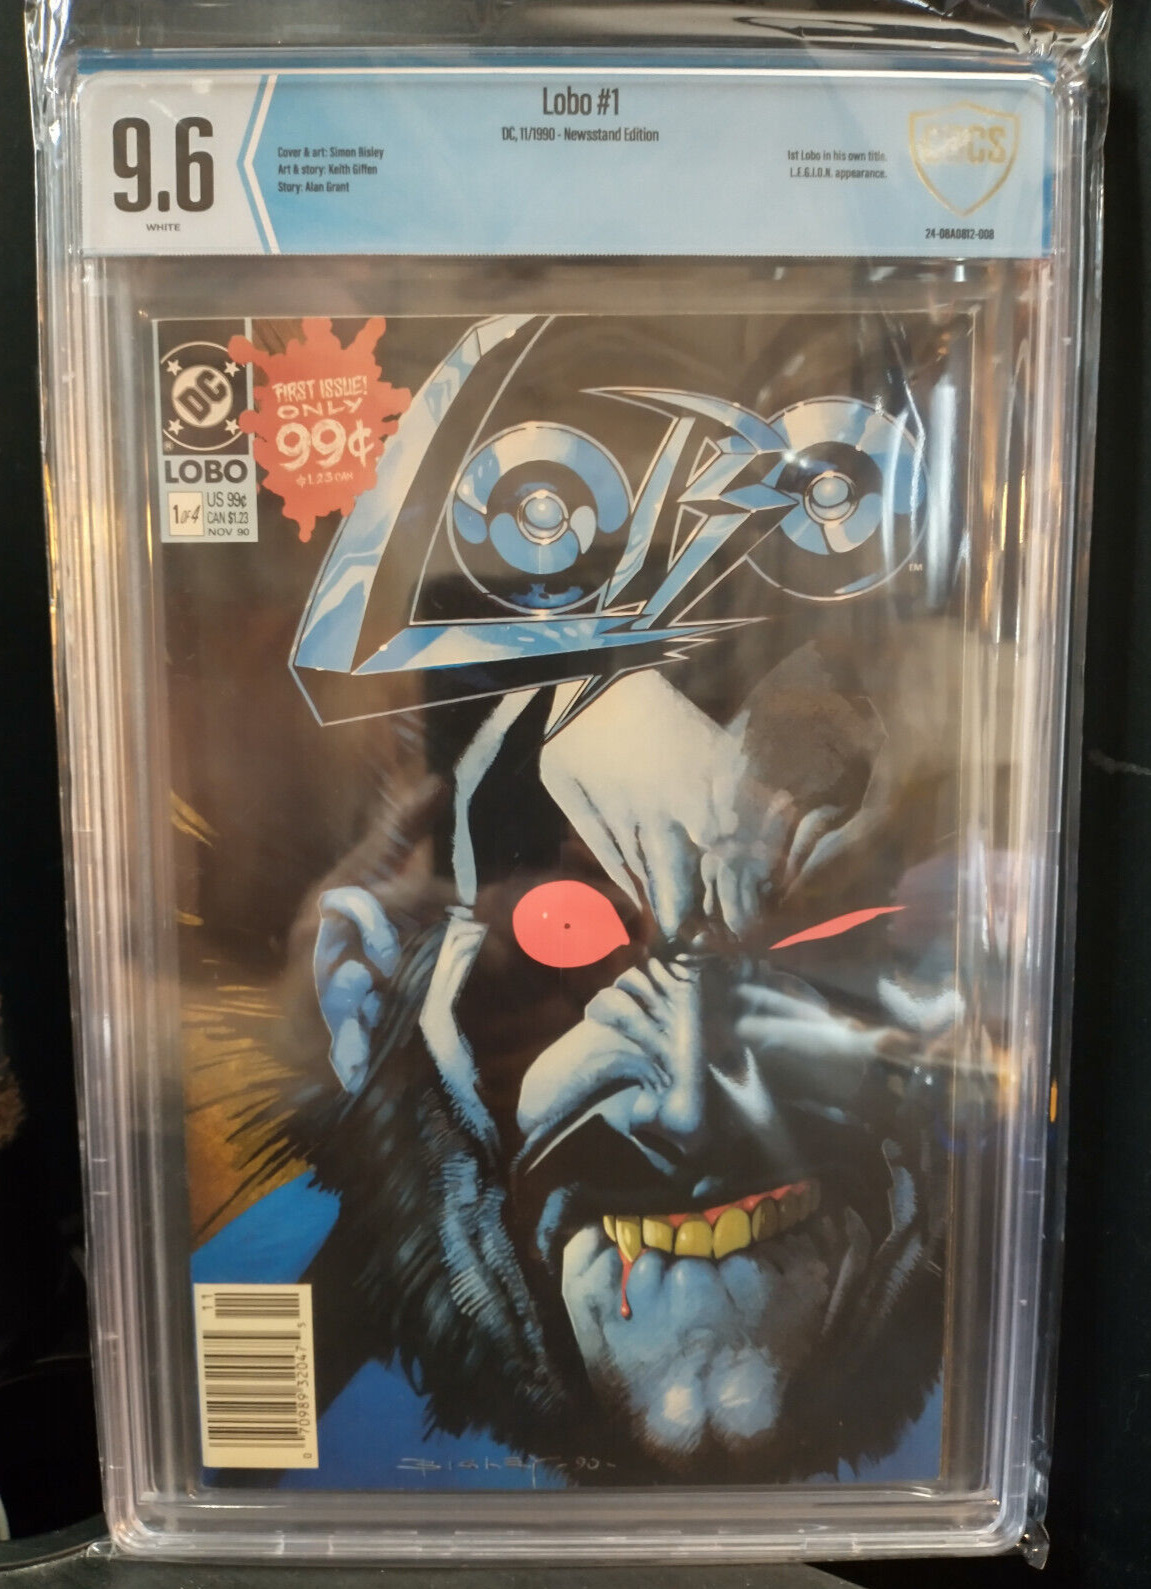 Lobo #1 NM 9.6 NEW CBCS LABEL white pages, Bisley cover, Rare Newsstand not CGC